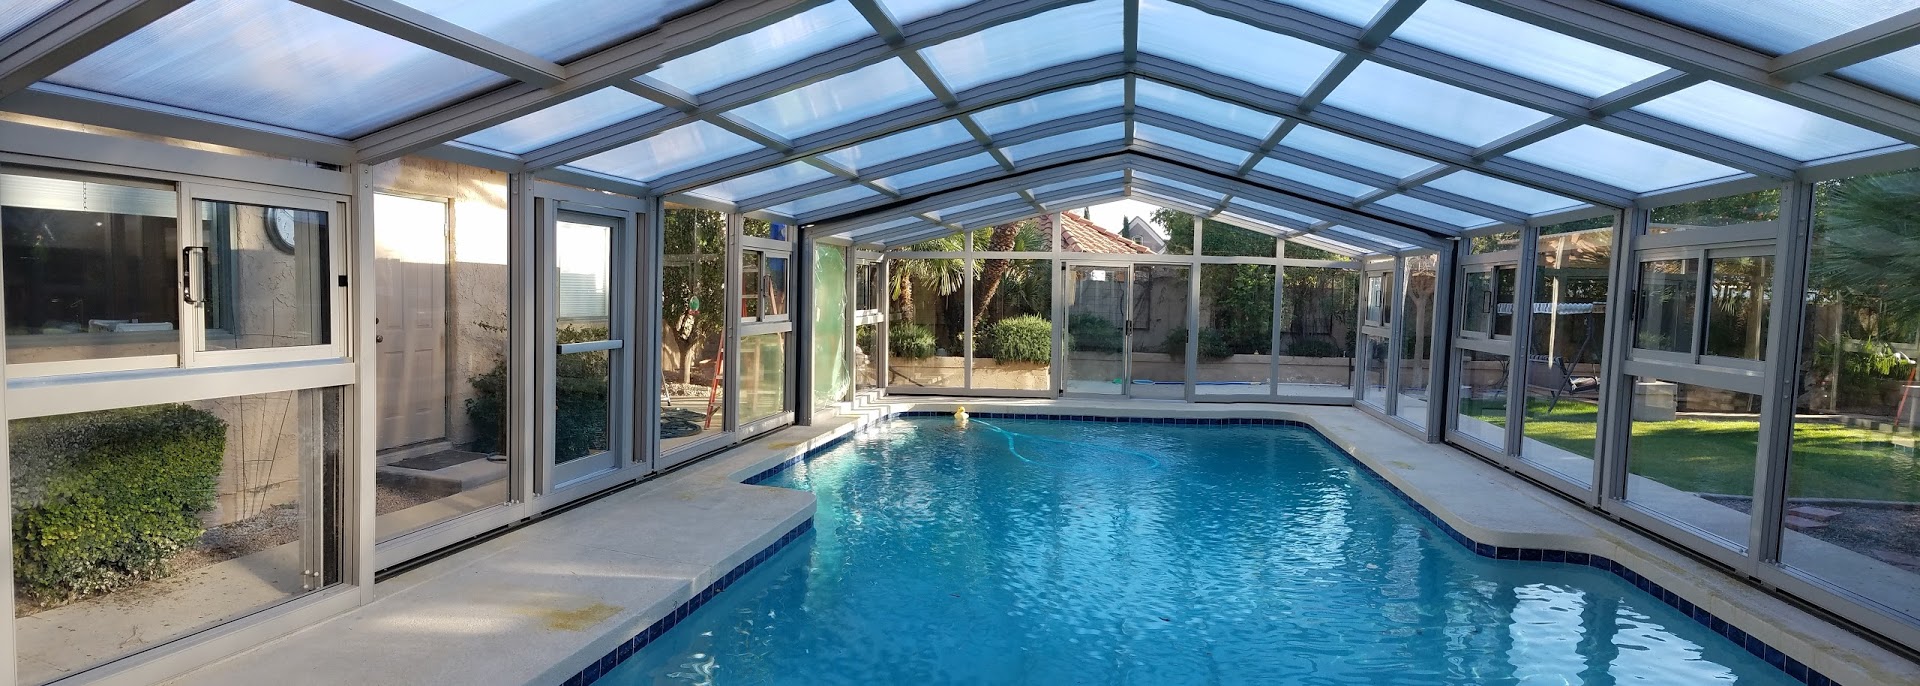 High profile retractable pool enclosure that is classified as a permanent structure and subject to many regulations